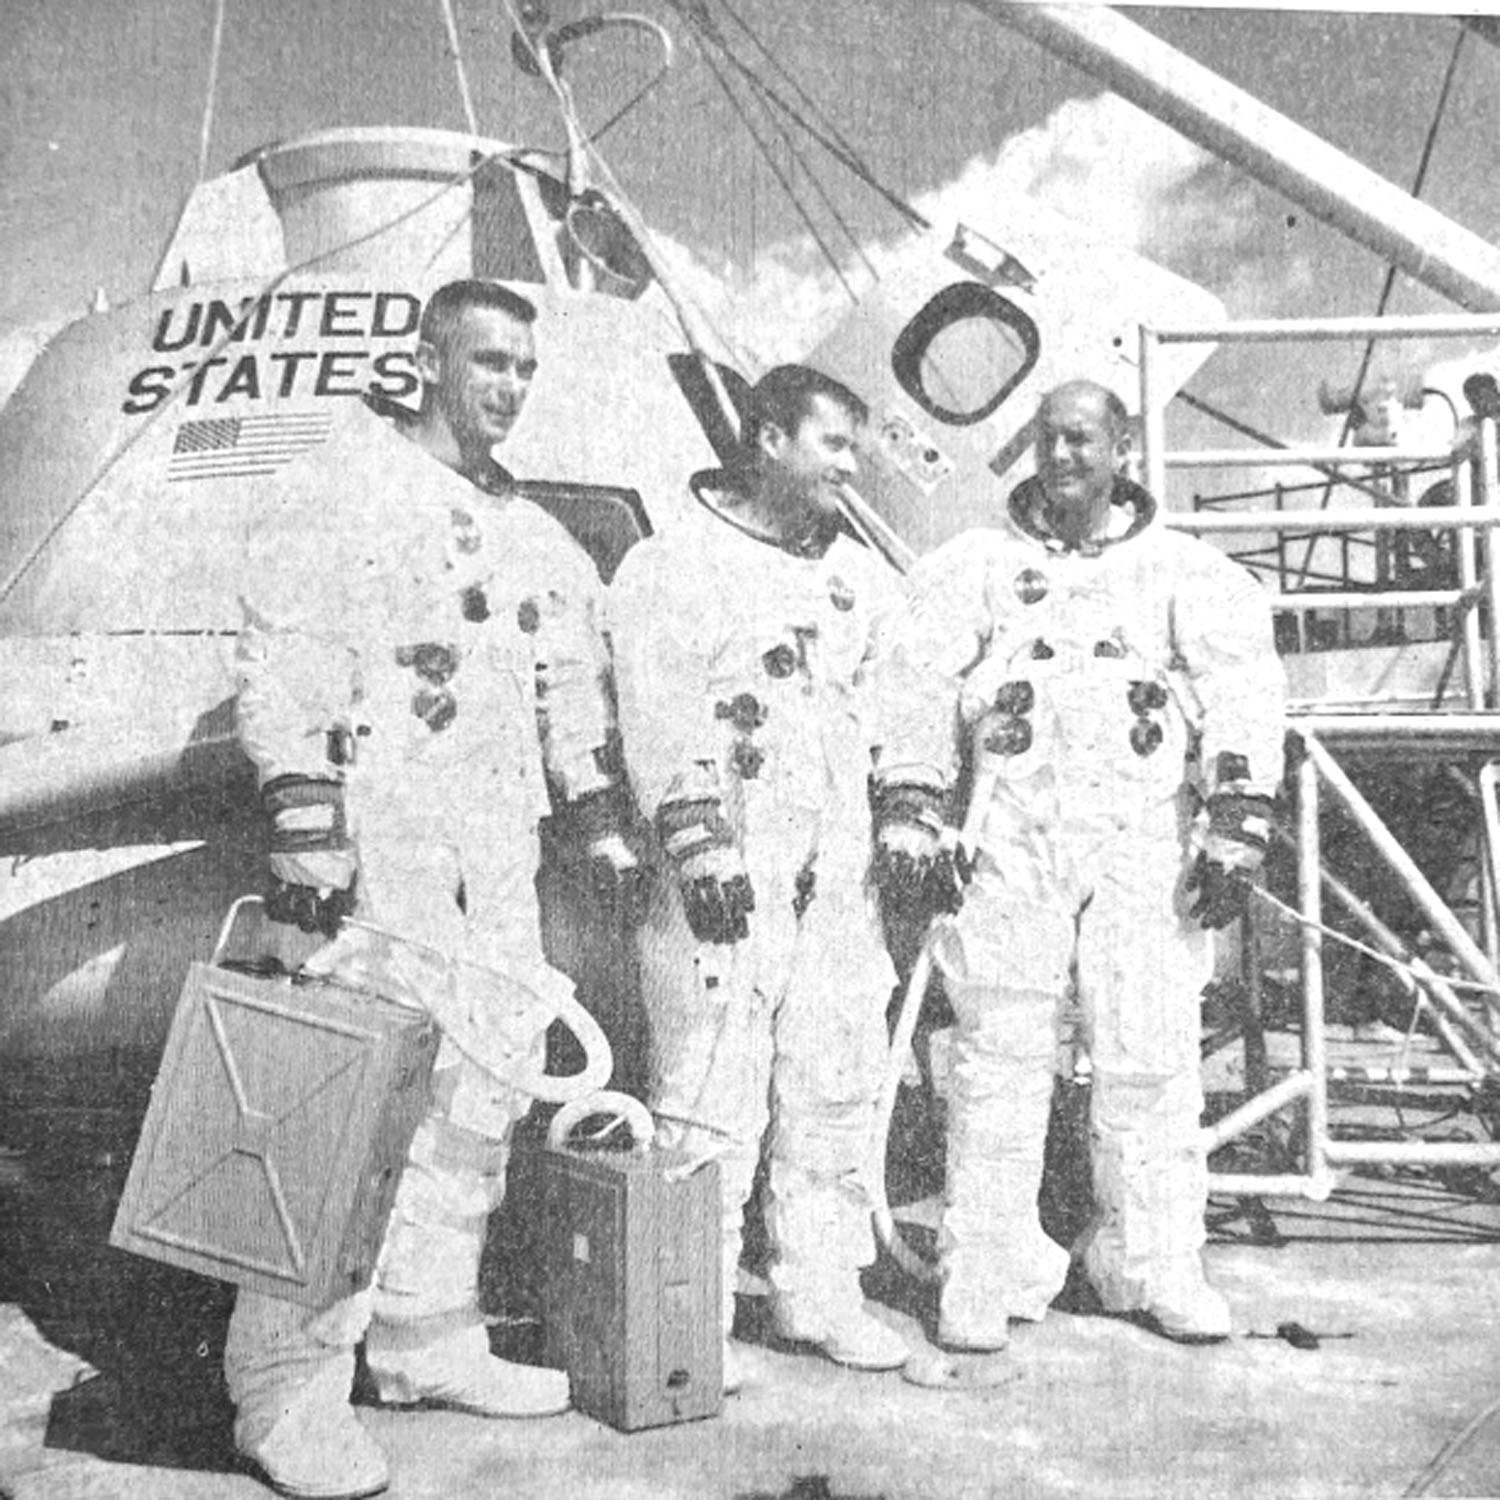 APOLLO 10 CREW: Ready for the final countdown are the astronauts Eugene Cernan, lunar module pilot, John W. Young, command module pilot and Thomas Stafford, mission commander, far right. May 15, 1969